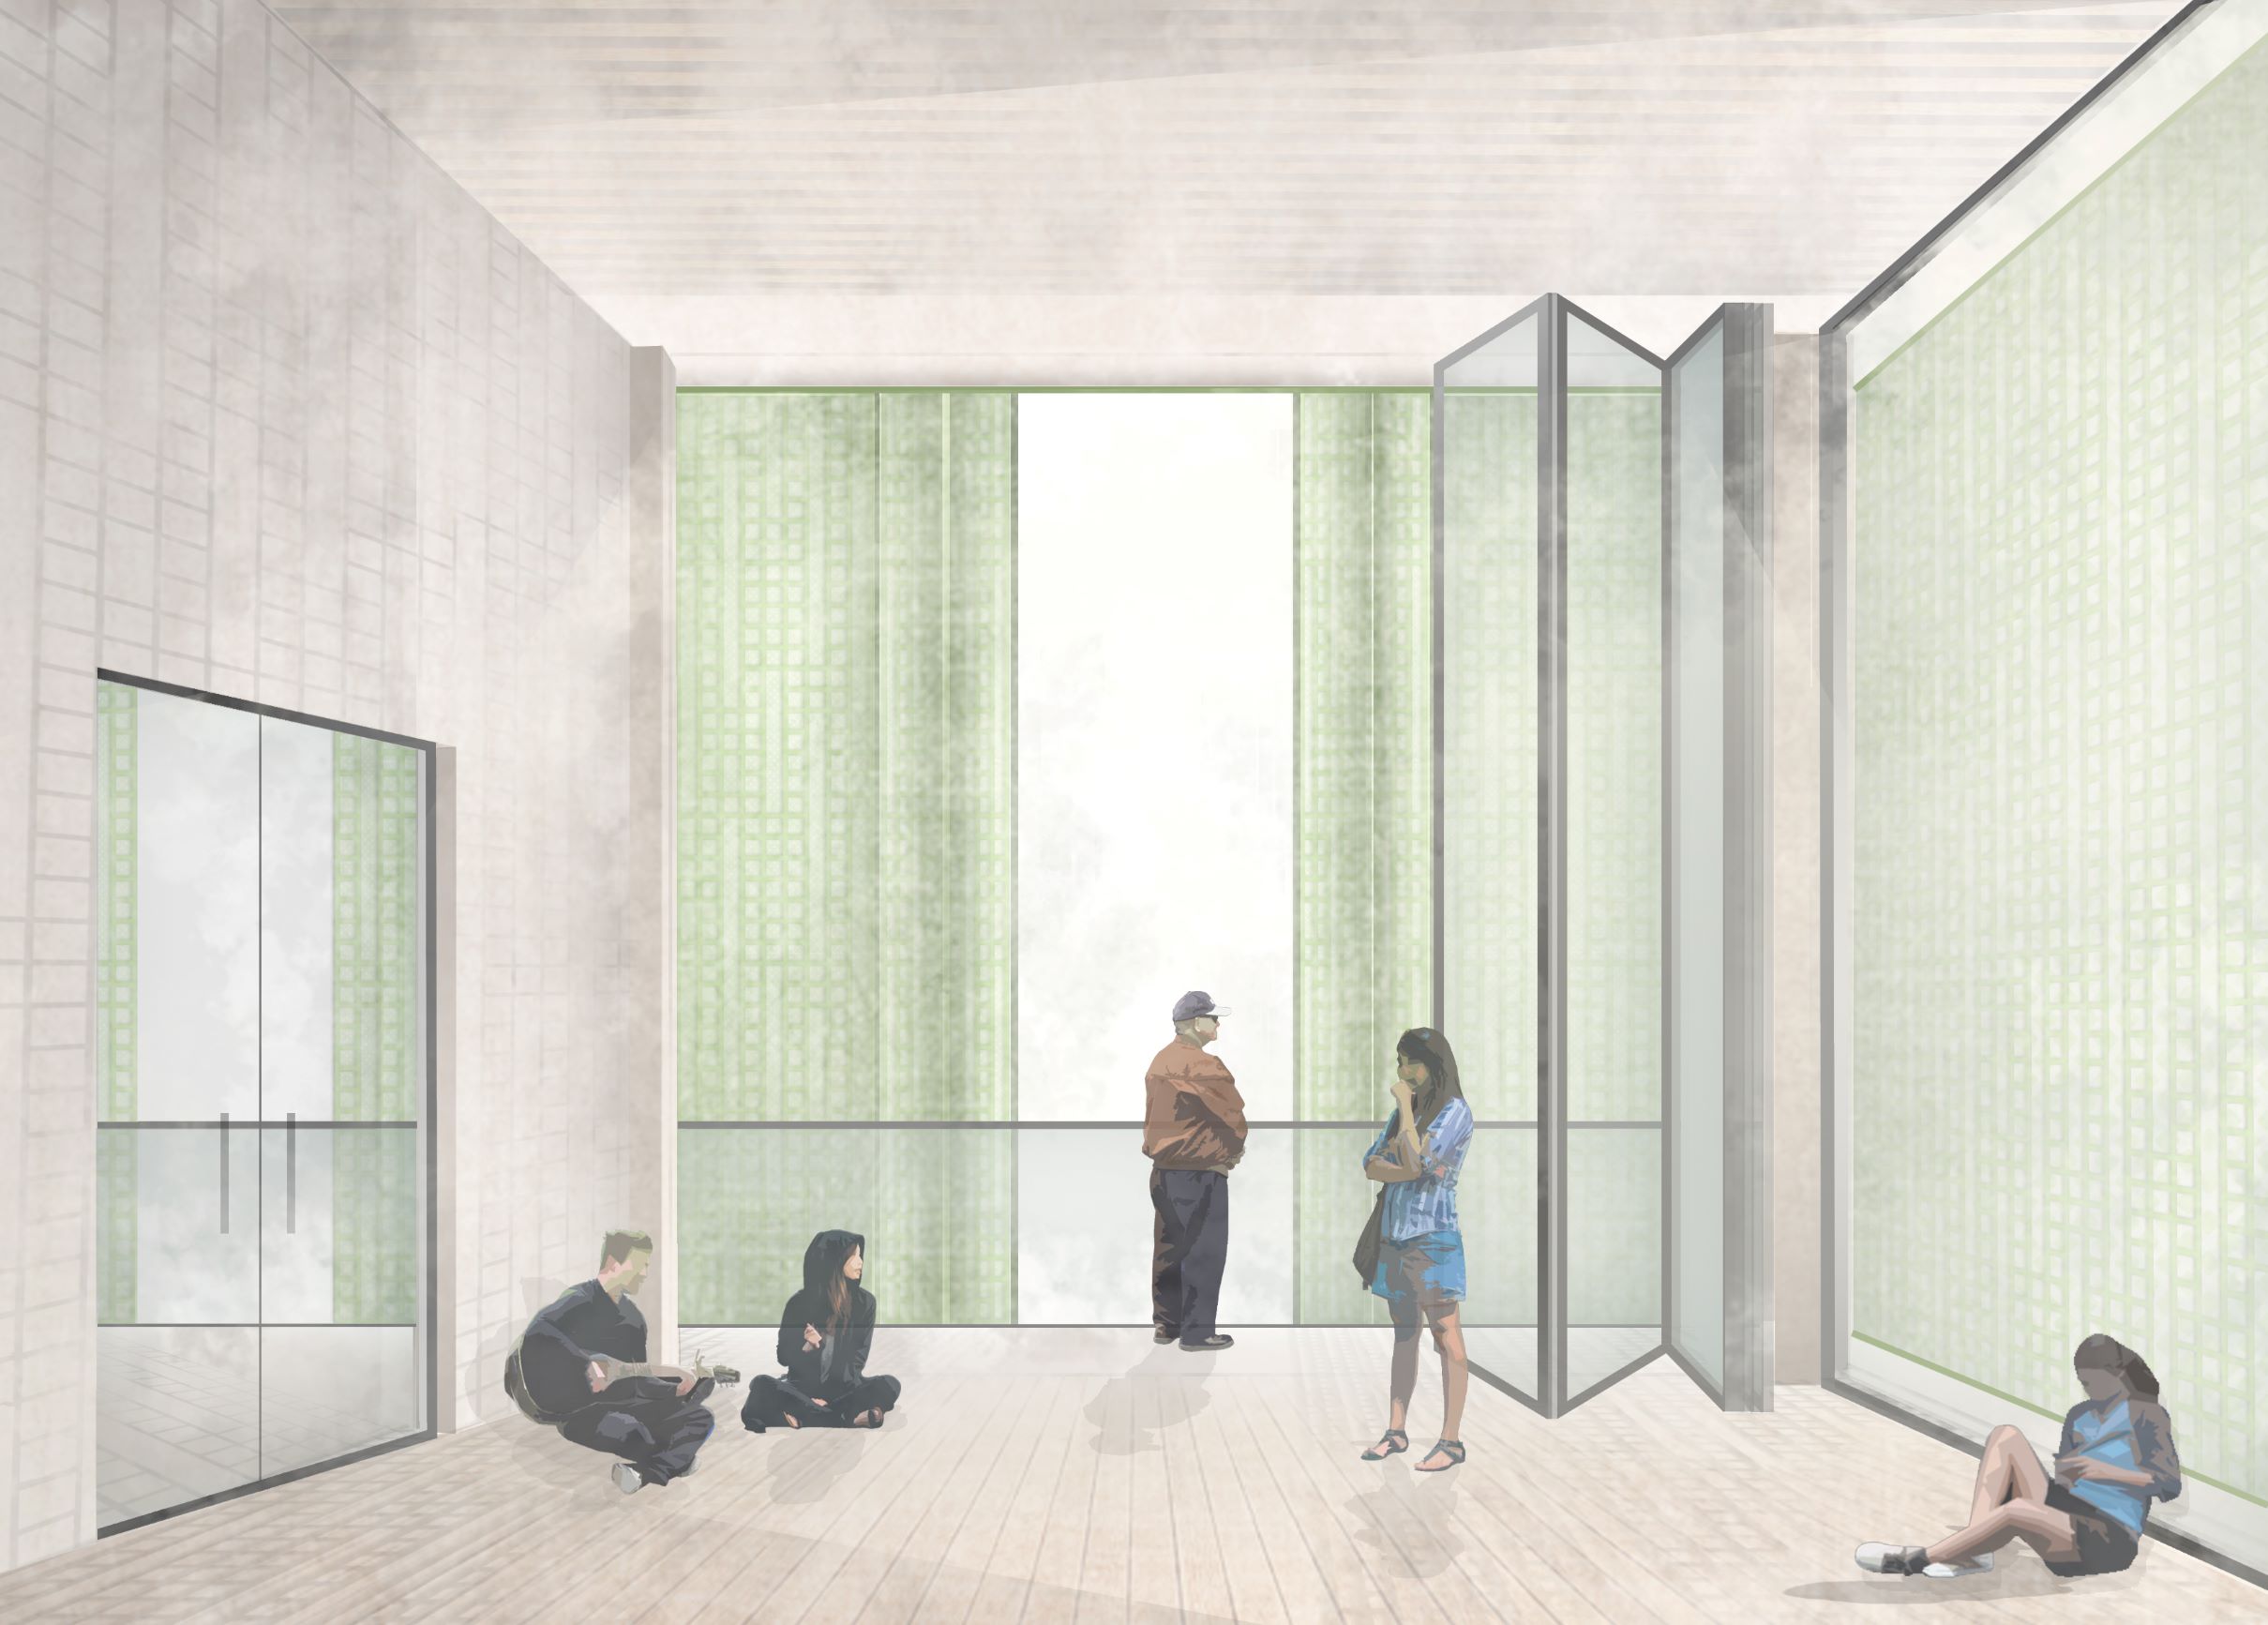 BA (Hons) Architecture work by Jane Ezechi showing an interior view of green perforated screens.